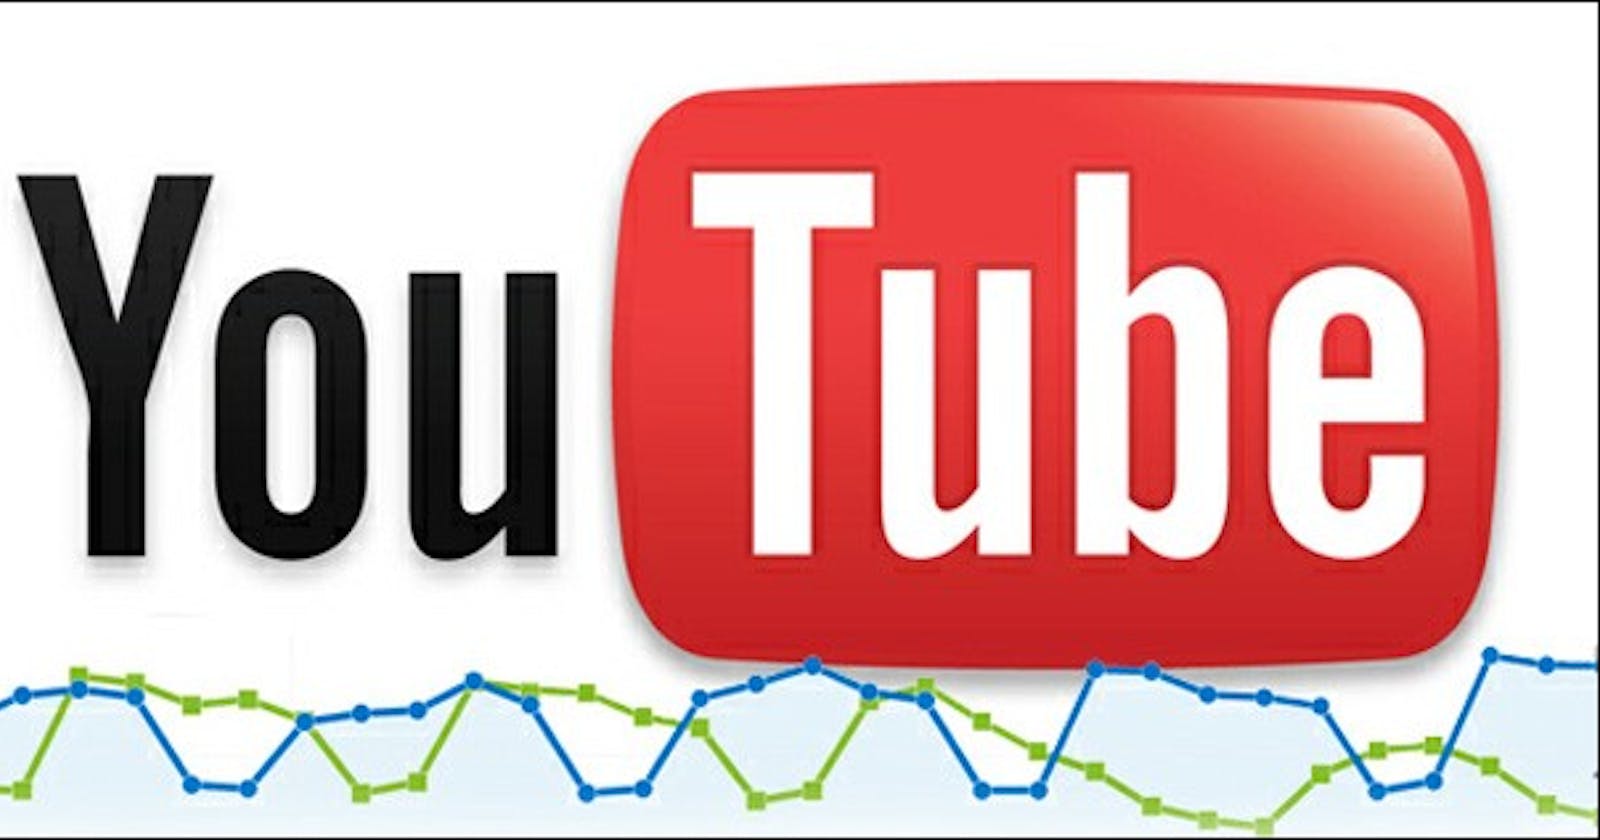 Corrections for the Youtube Analytics “Sample Application”